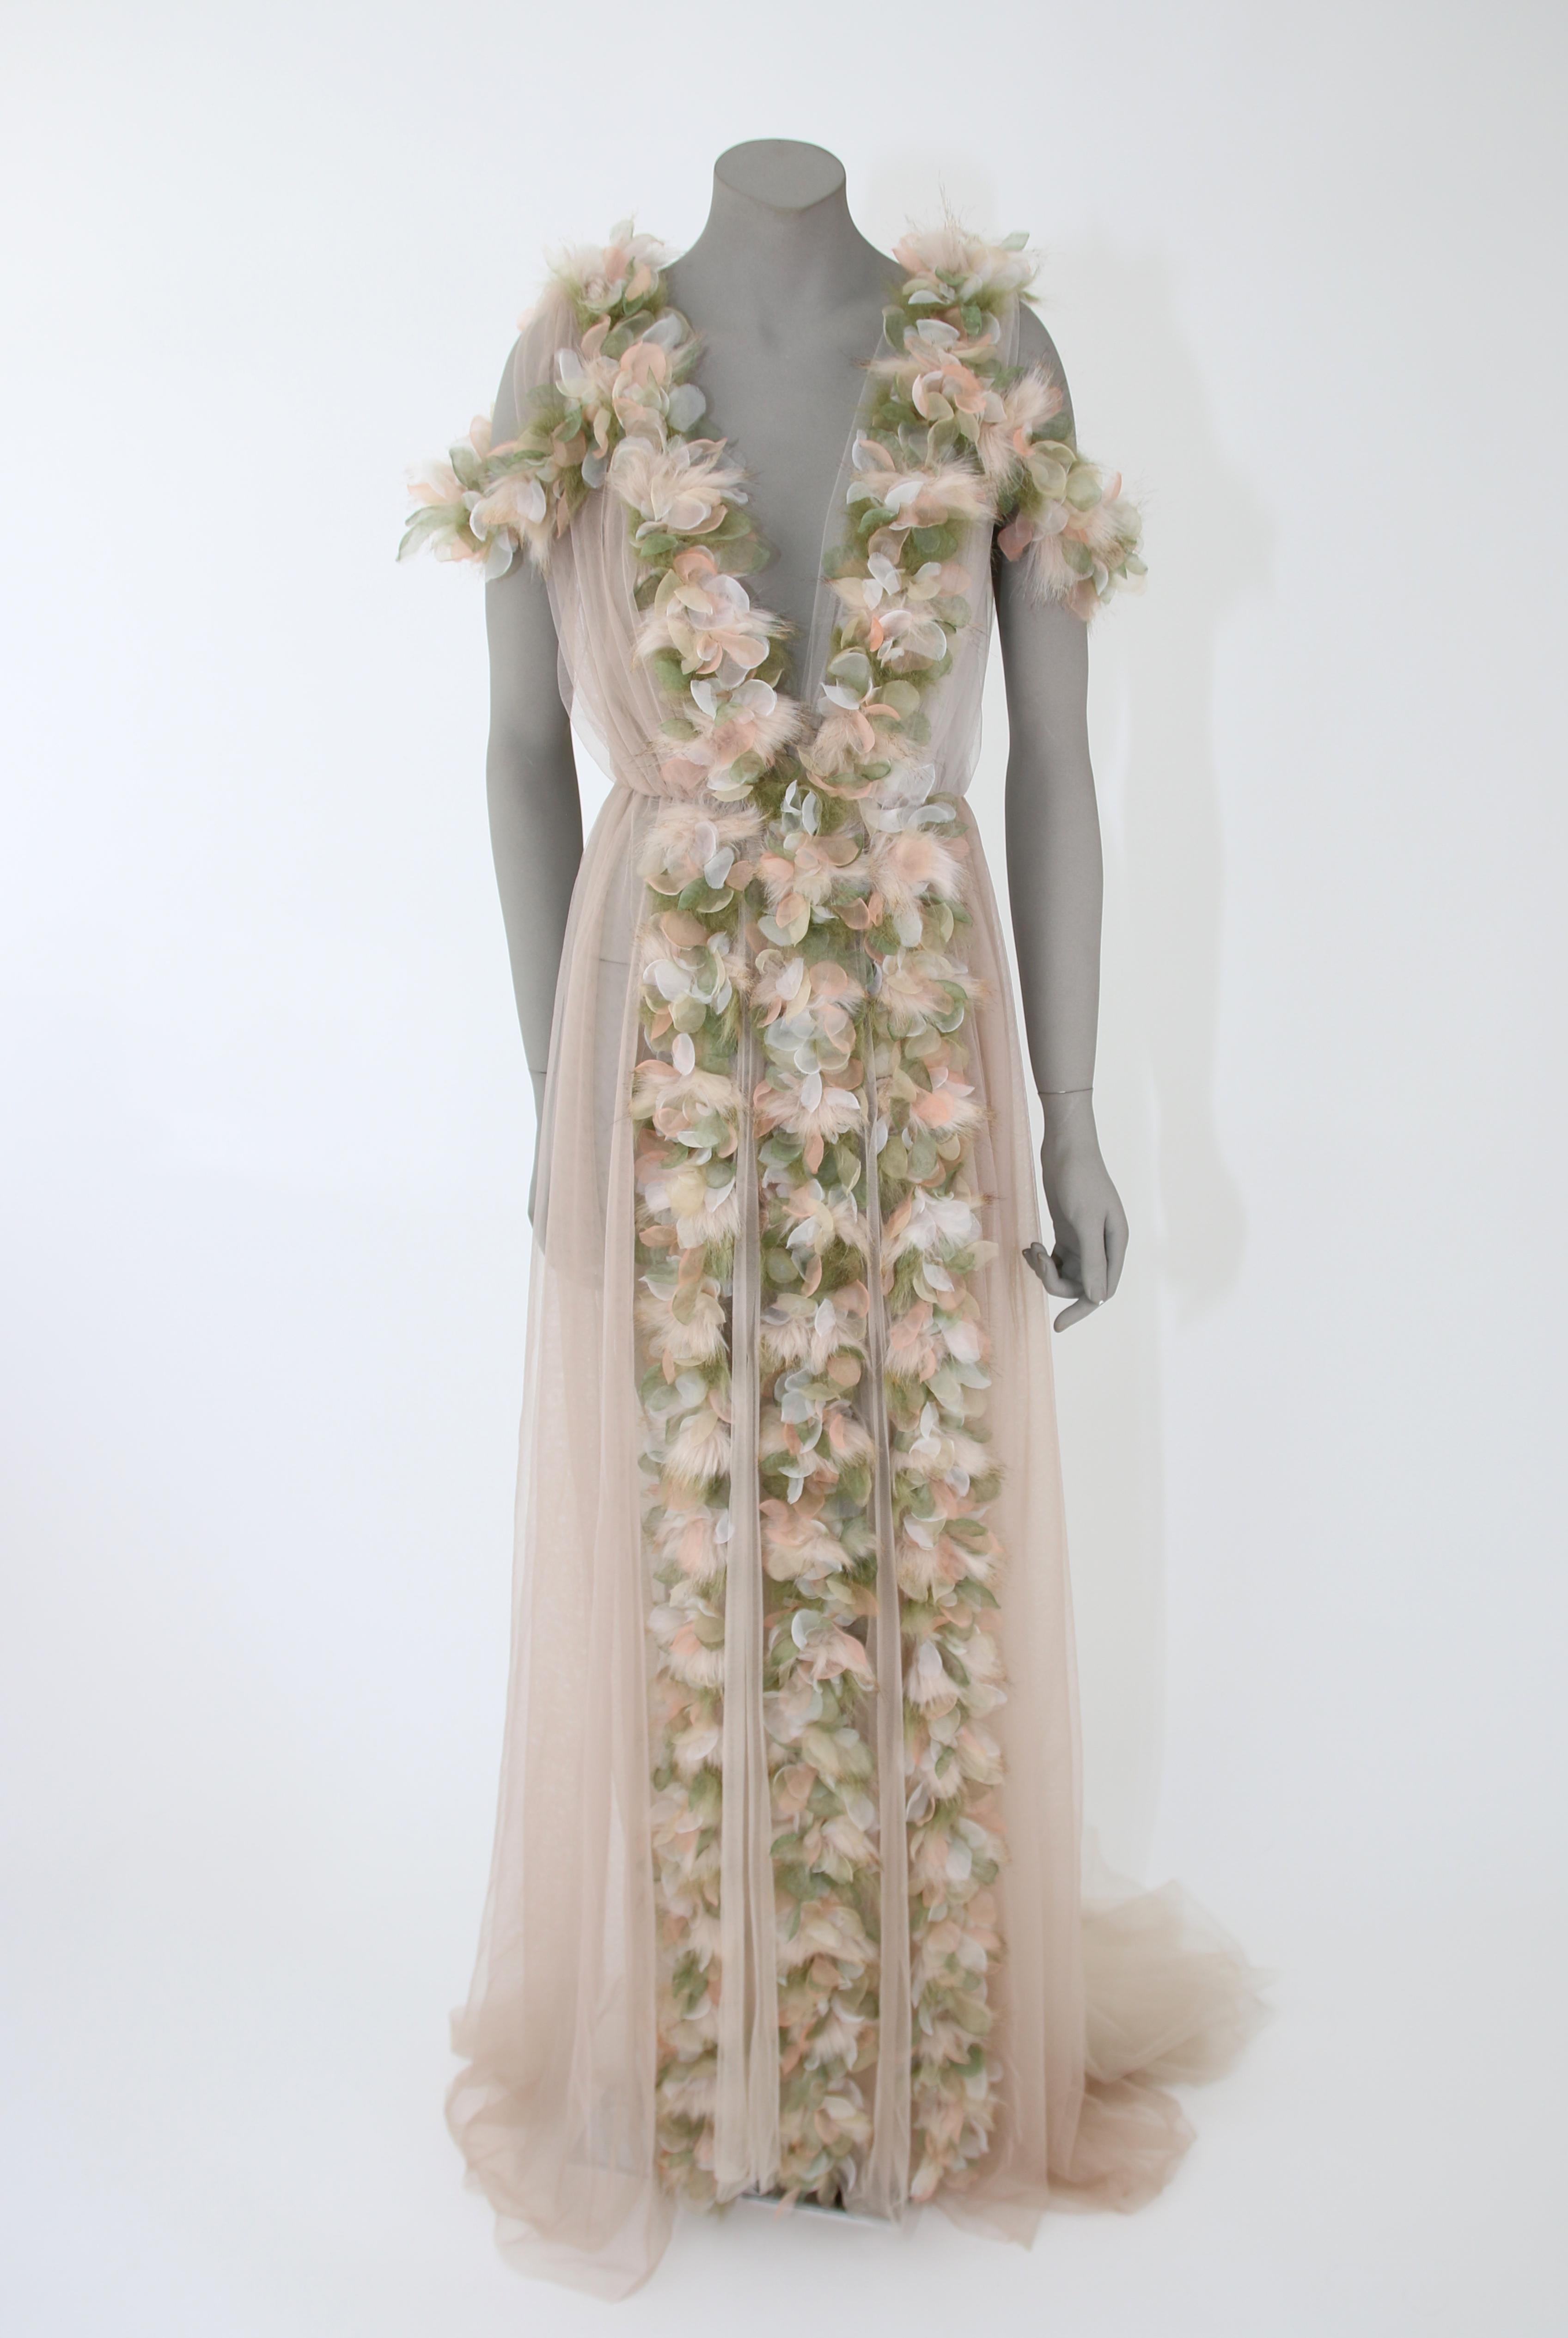 Pelush Champagne Tulle Dress Gown With Tridimensional Flowers And Faux Feathers  5